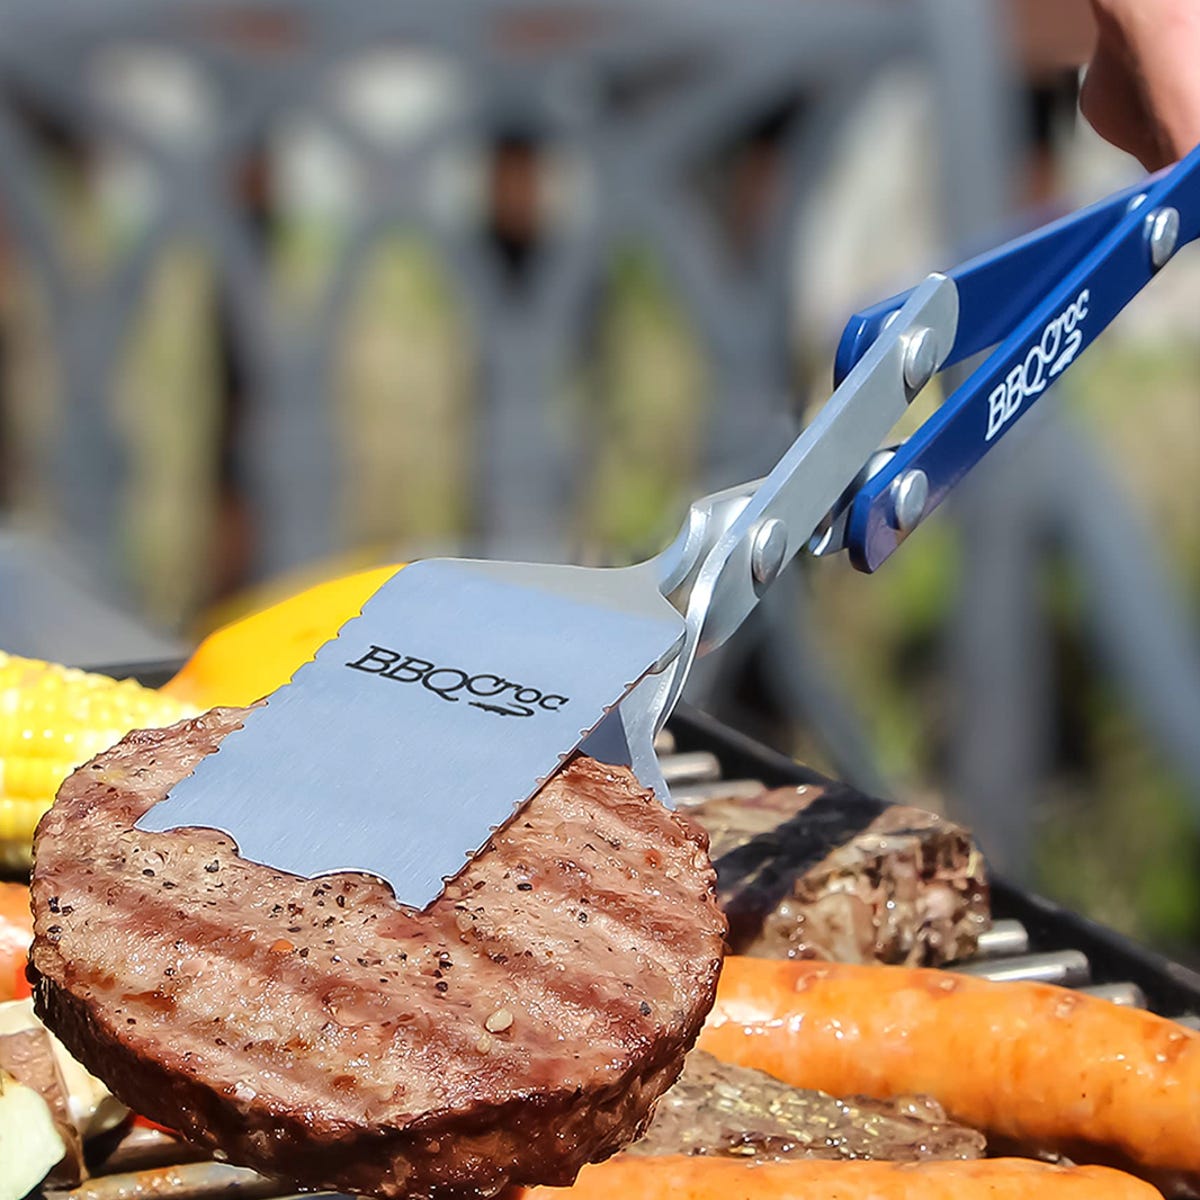 20 best grilling accessories of 2023: Grill tools for a great BBQ